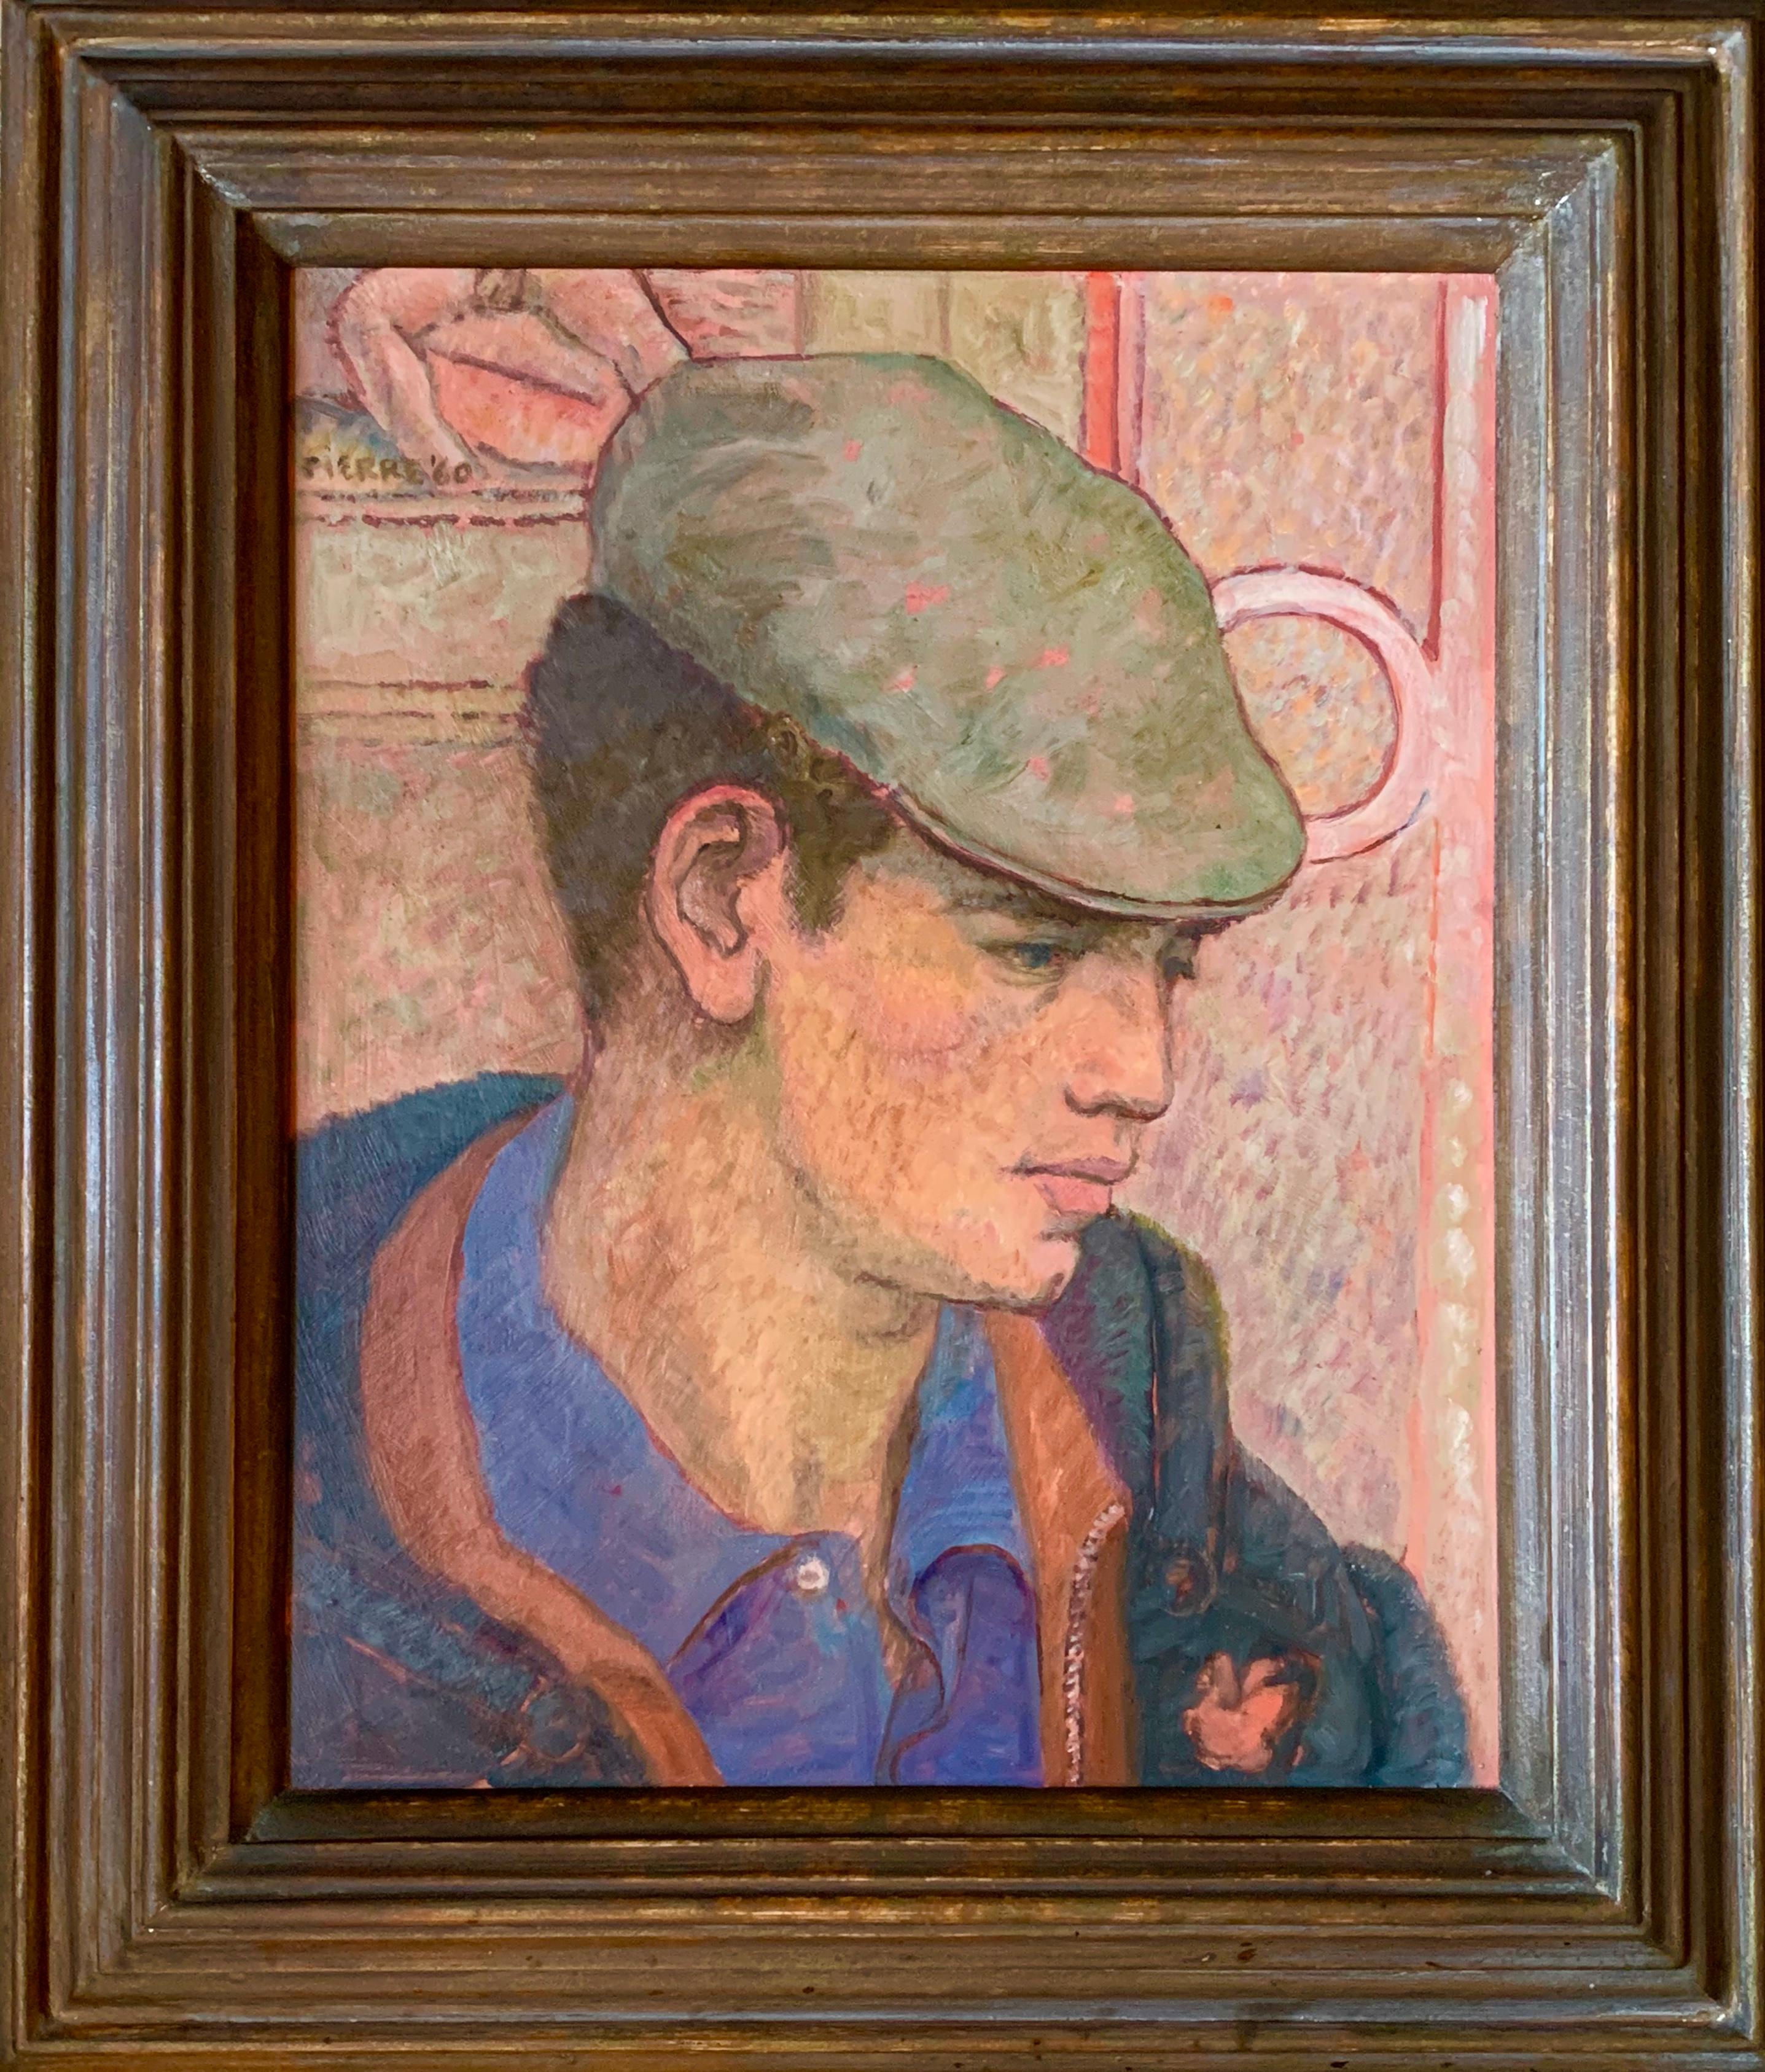 Modern British Portrait of a Handsome Young Gentleman in a Blue Shirt and Hat. - Painting by Peter Samuelson